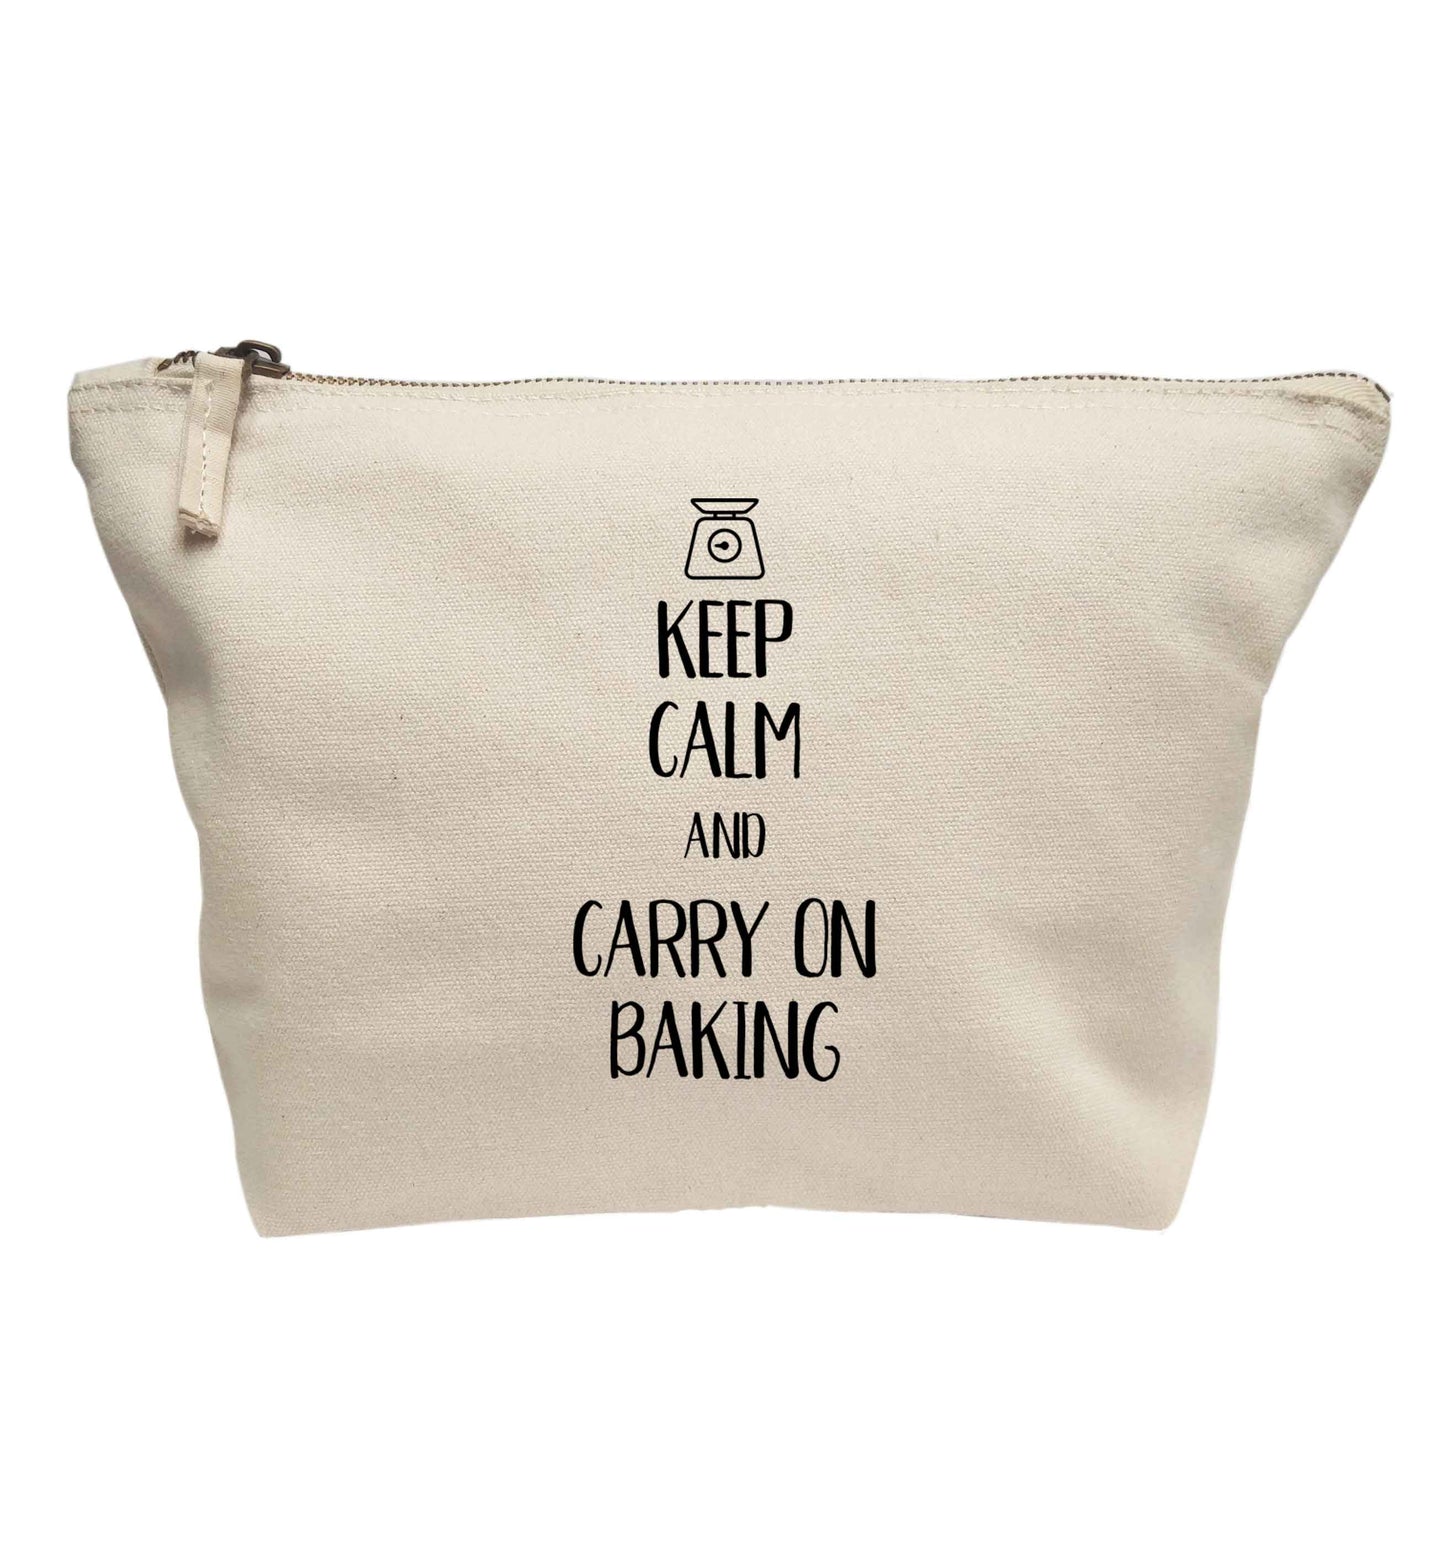 Keep calm and carry on baking | makeup / wash bag